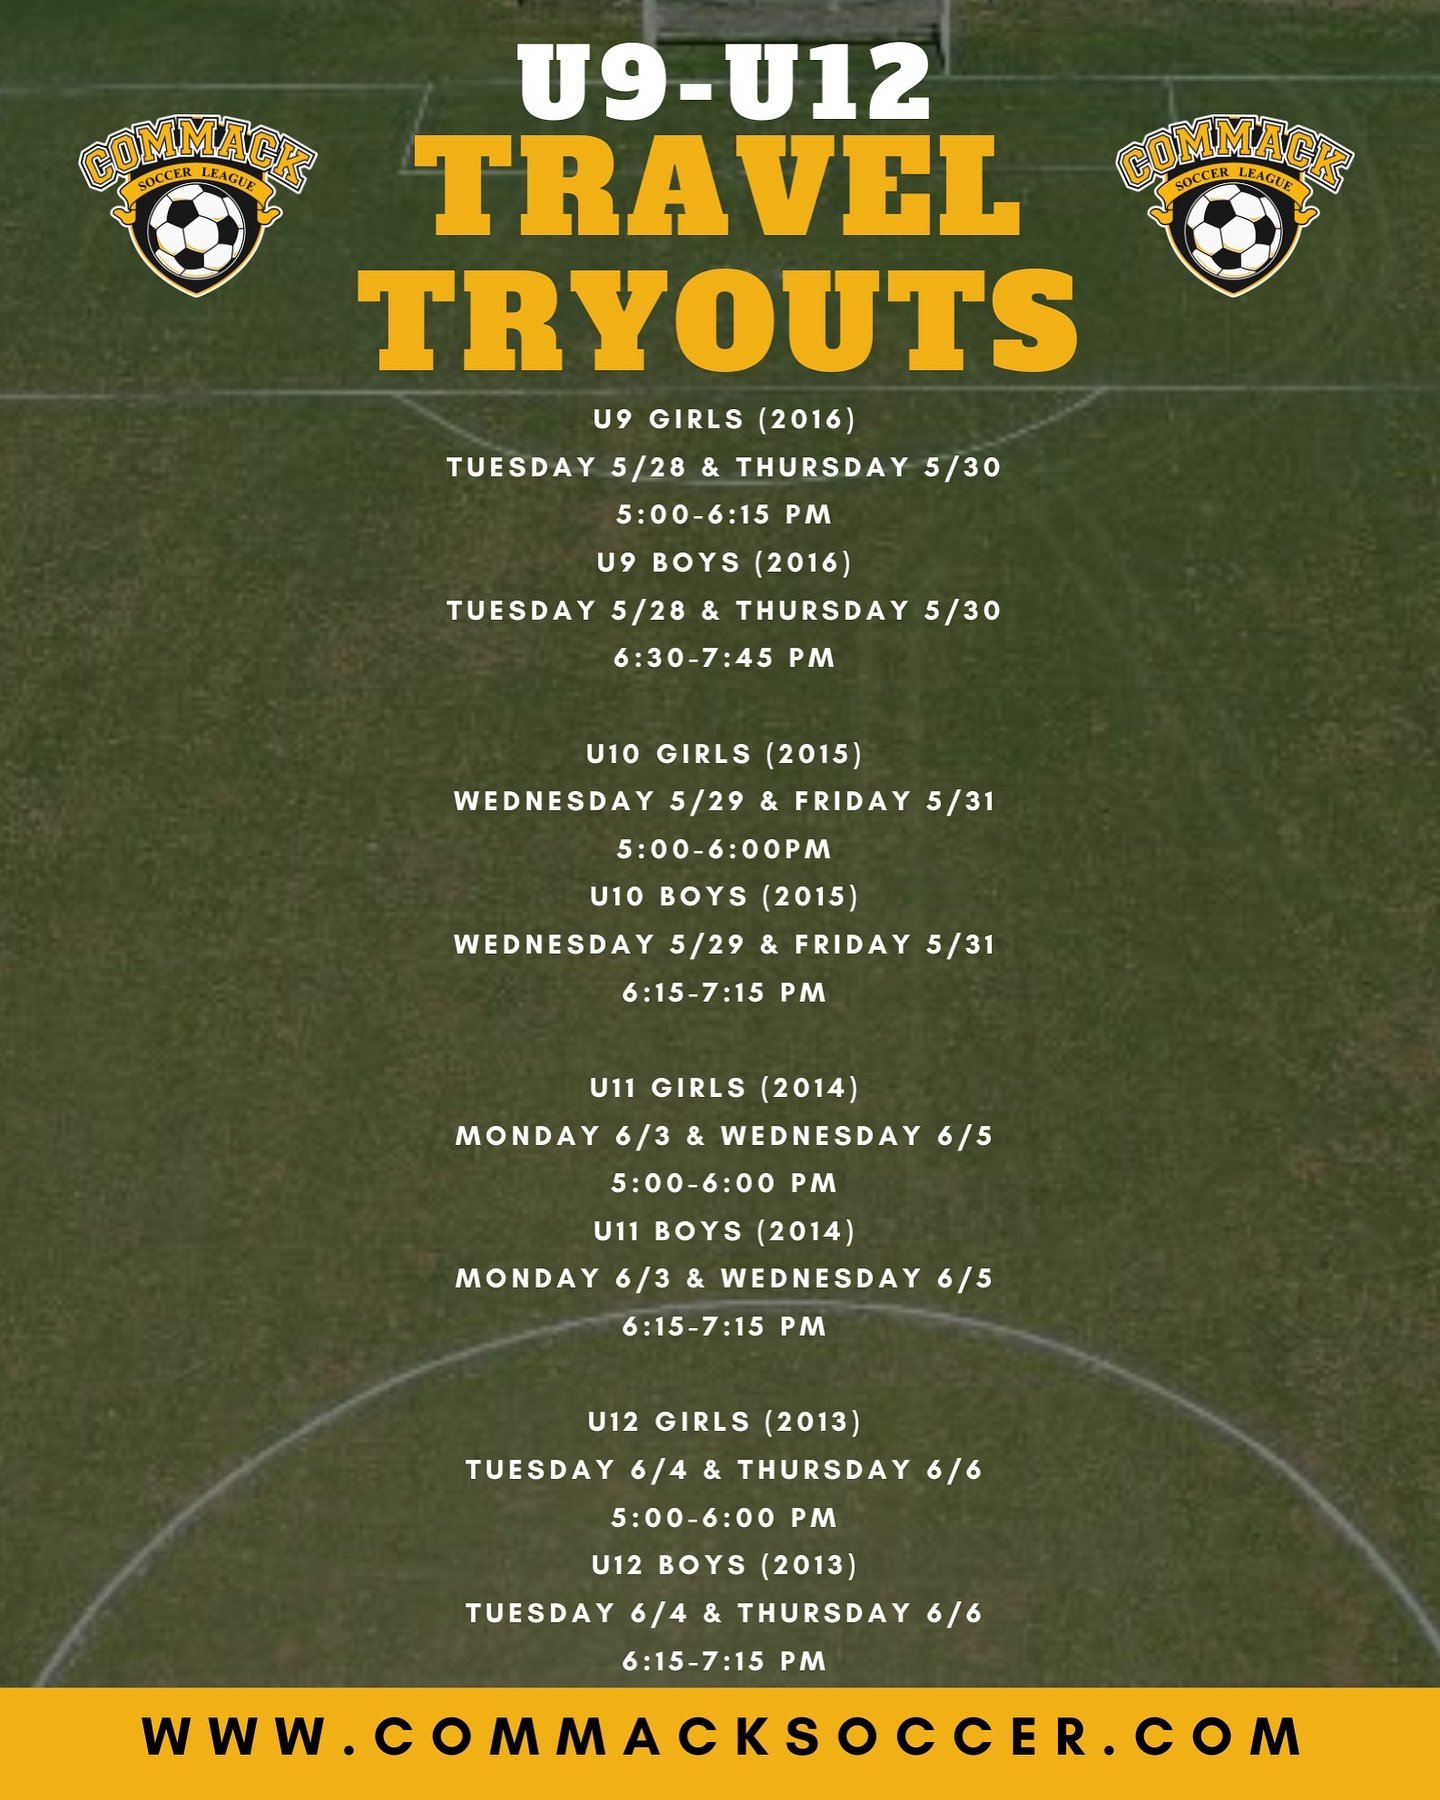 Our U9-U12 travel team pool tryouts are right around the corner! Registration for tryouts is free &amp; required- link in bio ⚽️ #CommackSoccer #CommackSoccerLeague